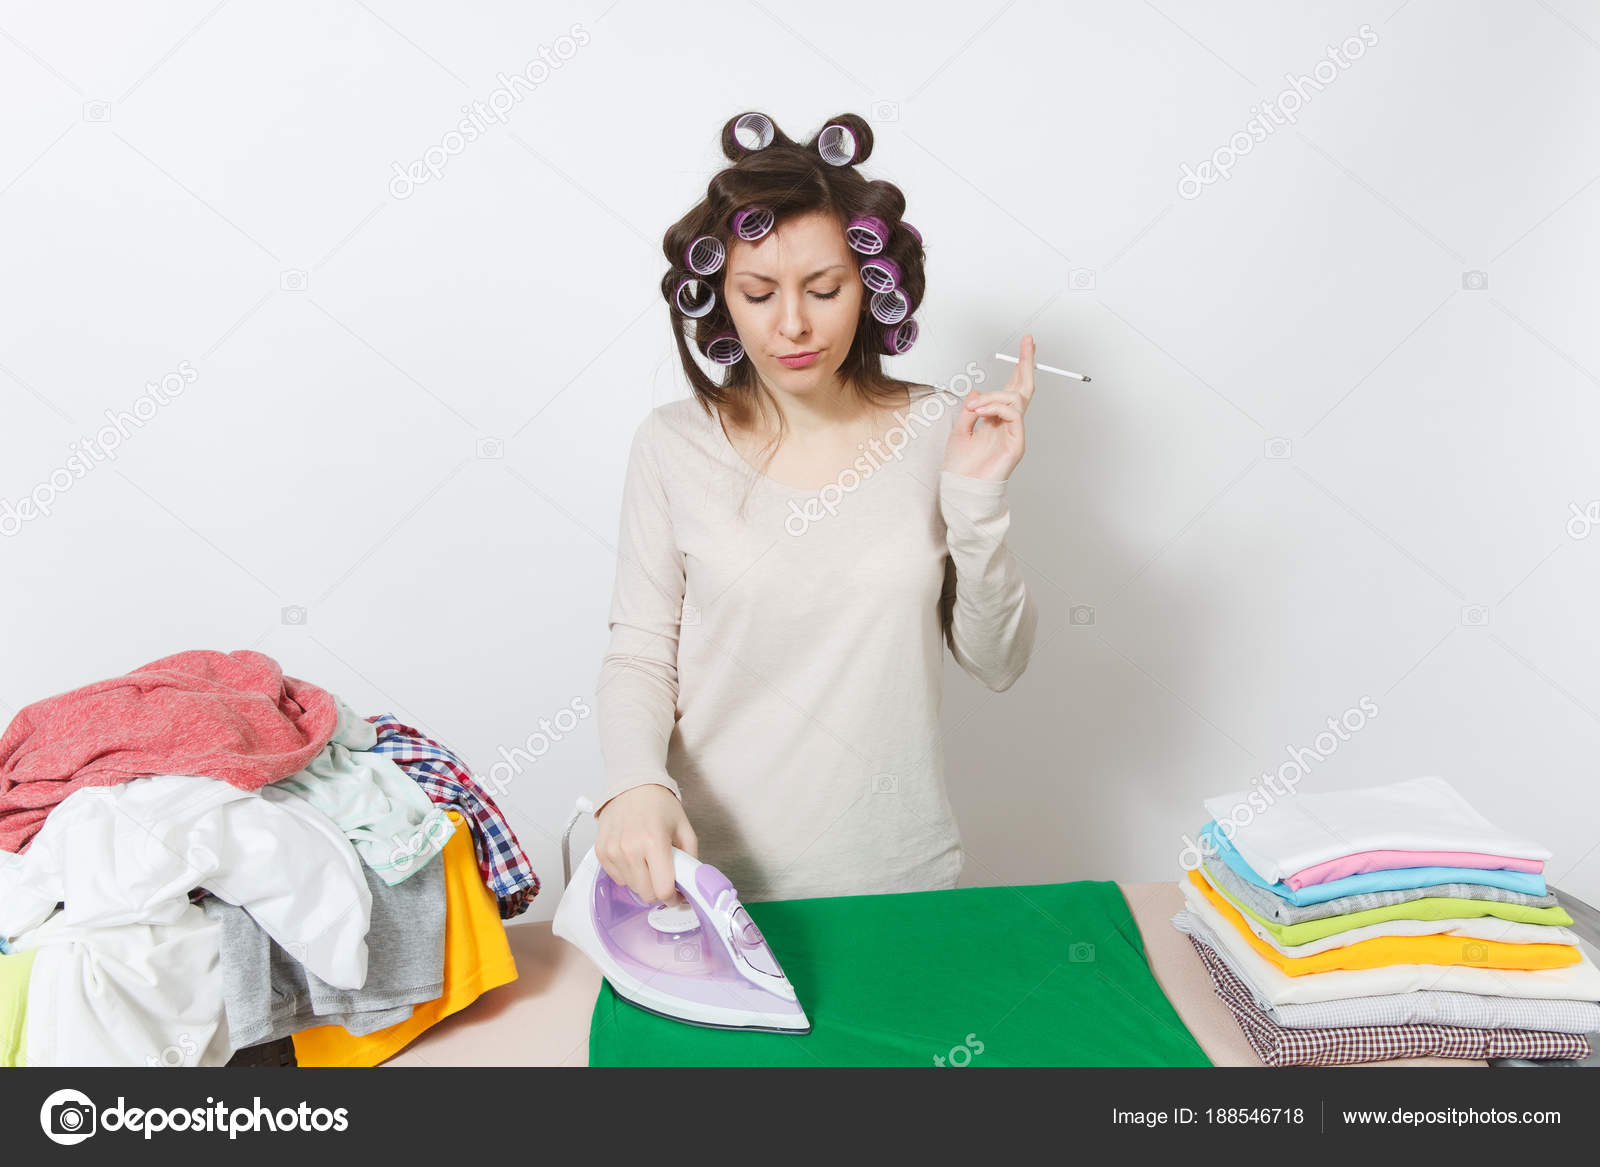 Distressed Fun Housewife With Curlers On Hair In Light Clothes